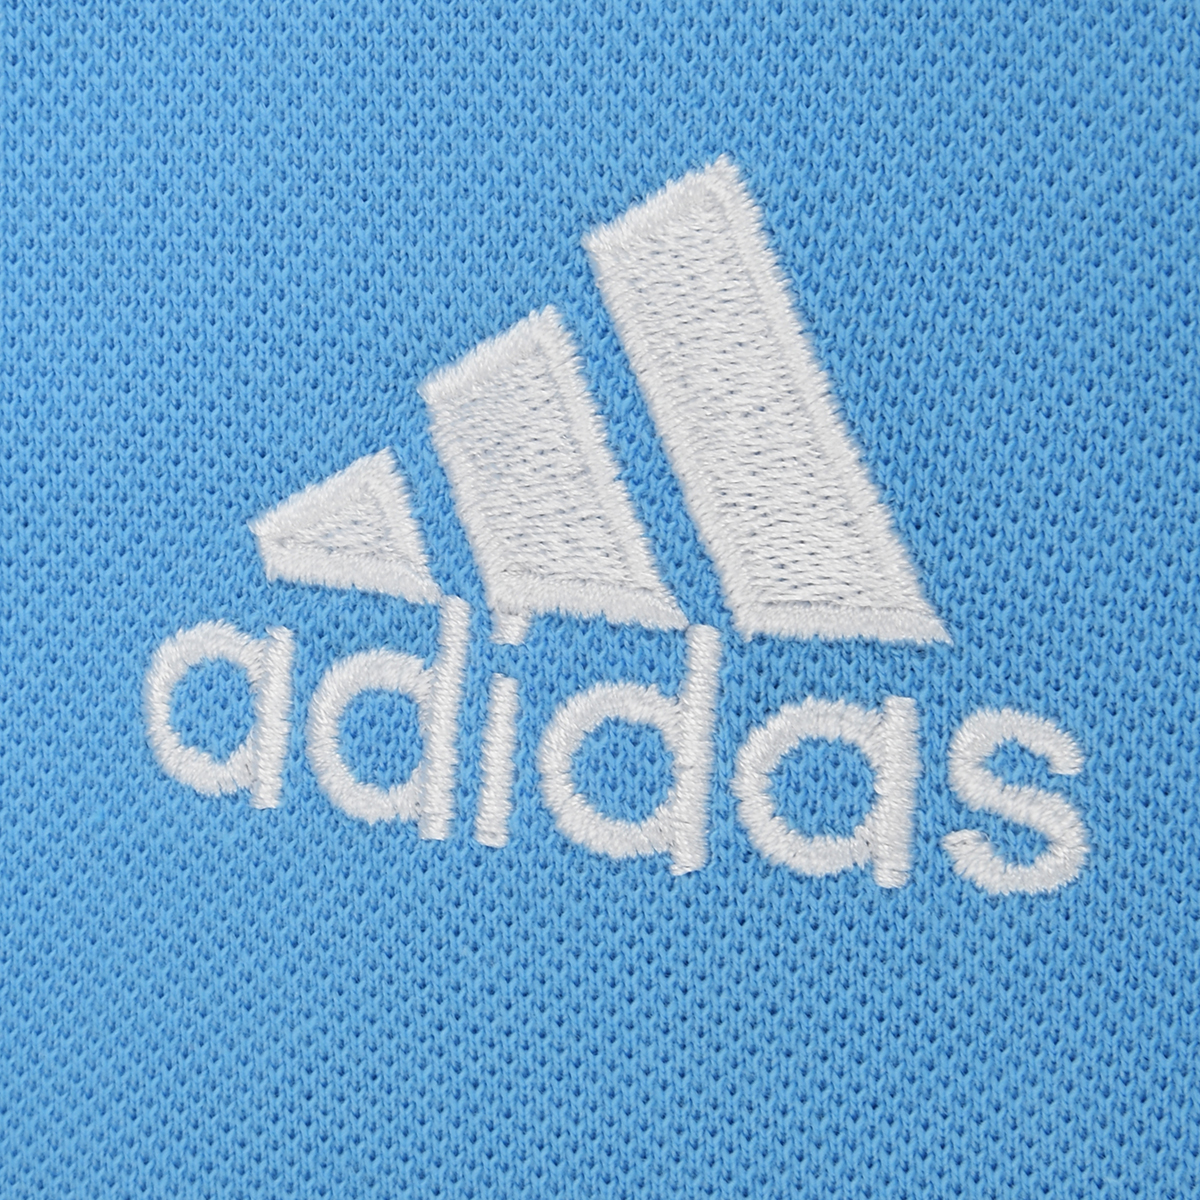 Chomba adidas Argentina DNA 3-Stripes Hombre,  image number null